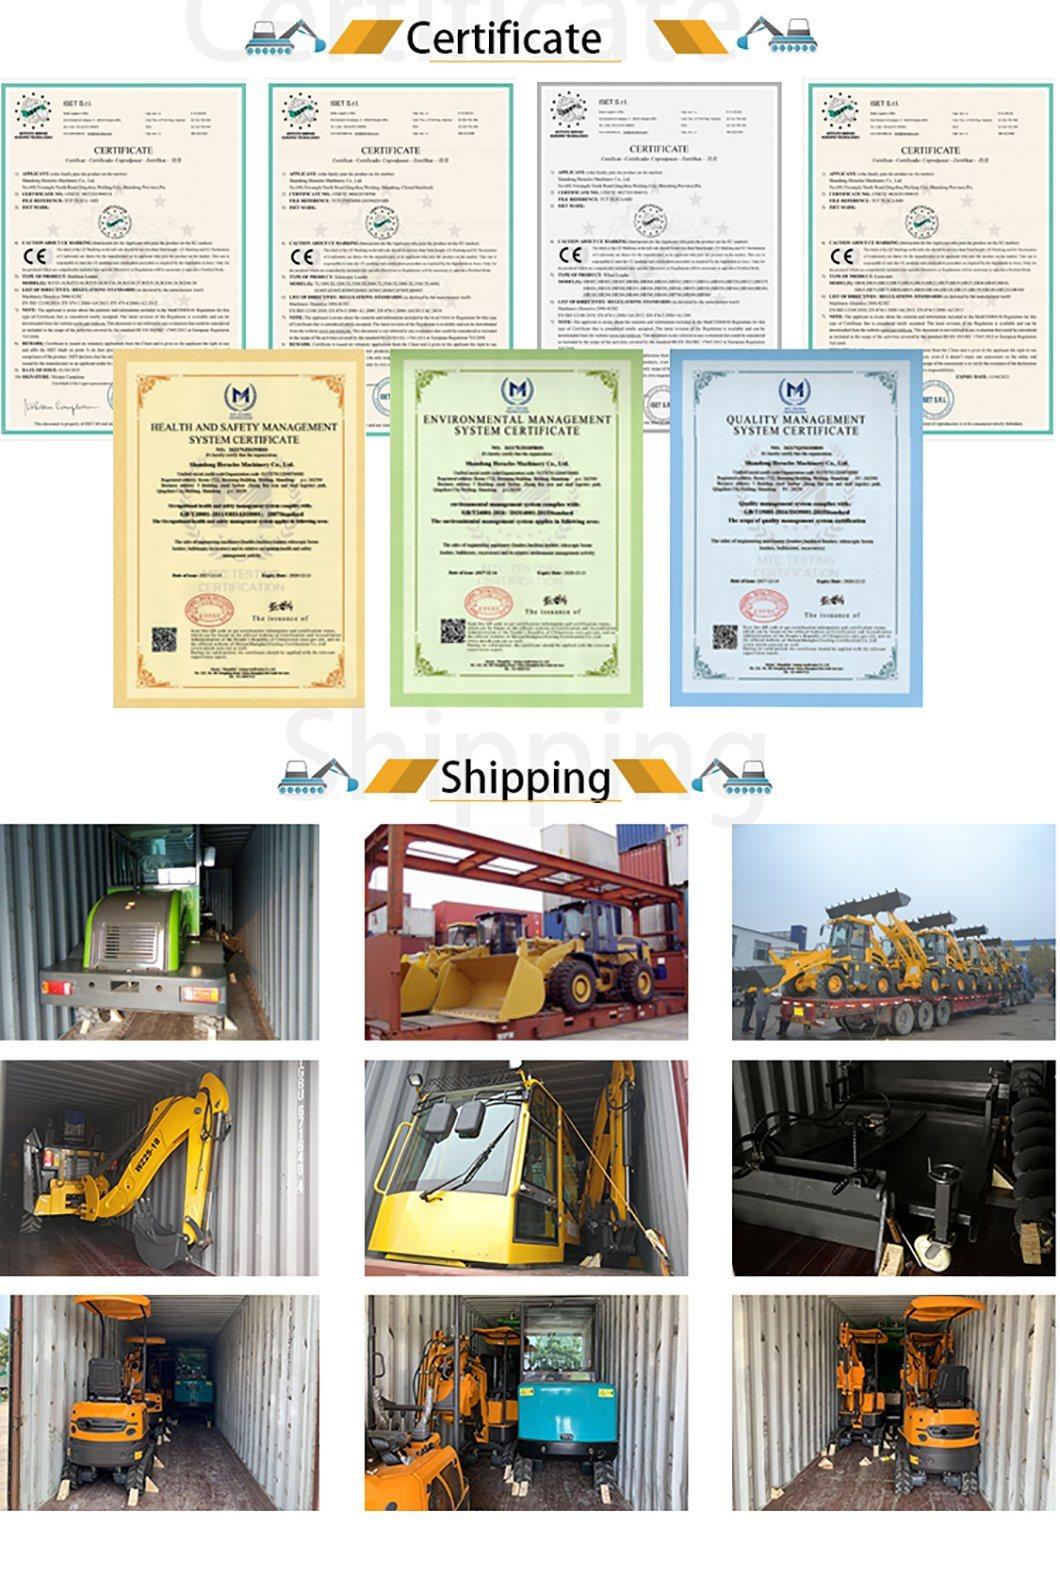 Construction Machinery Equipment Electric Forklift in Dubai